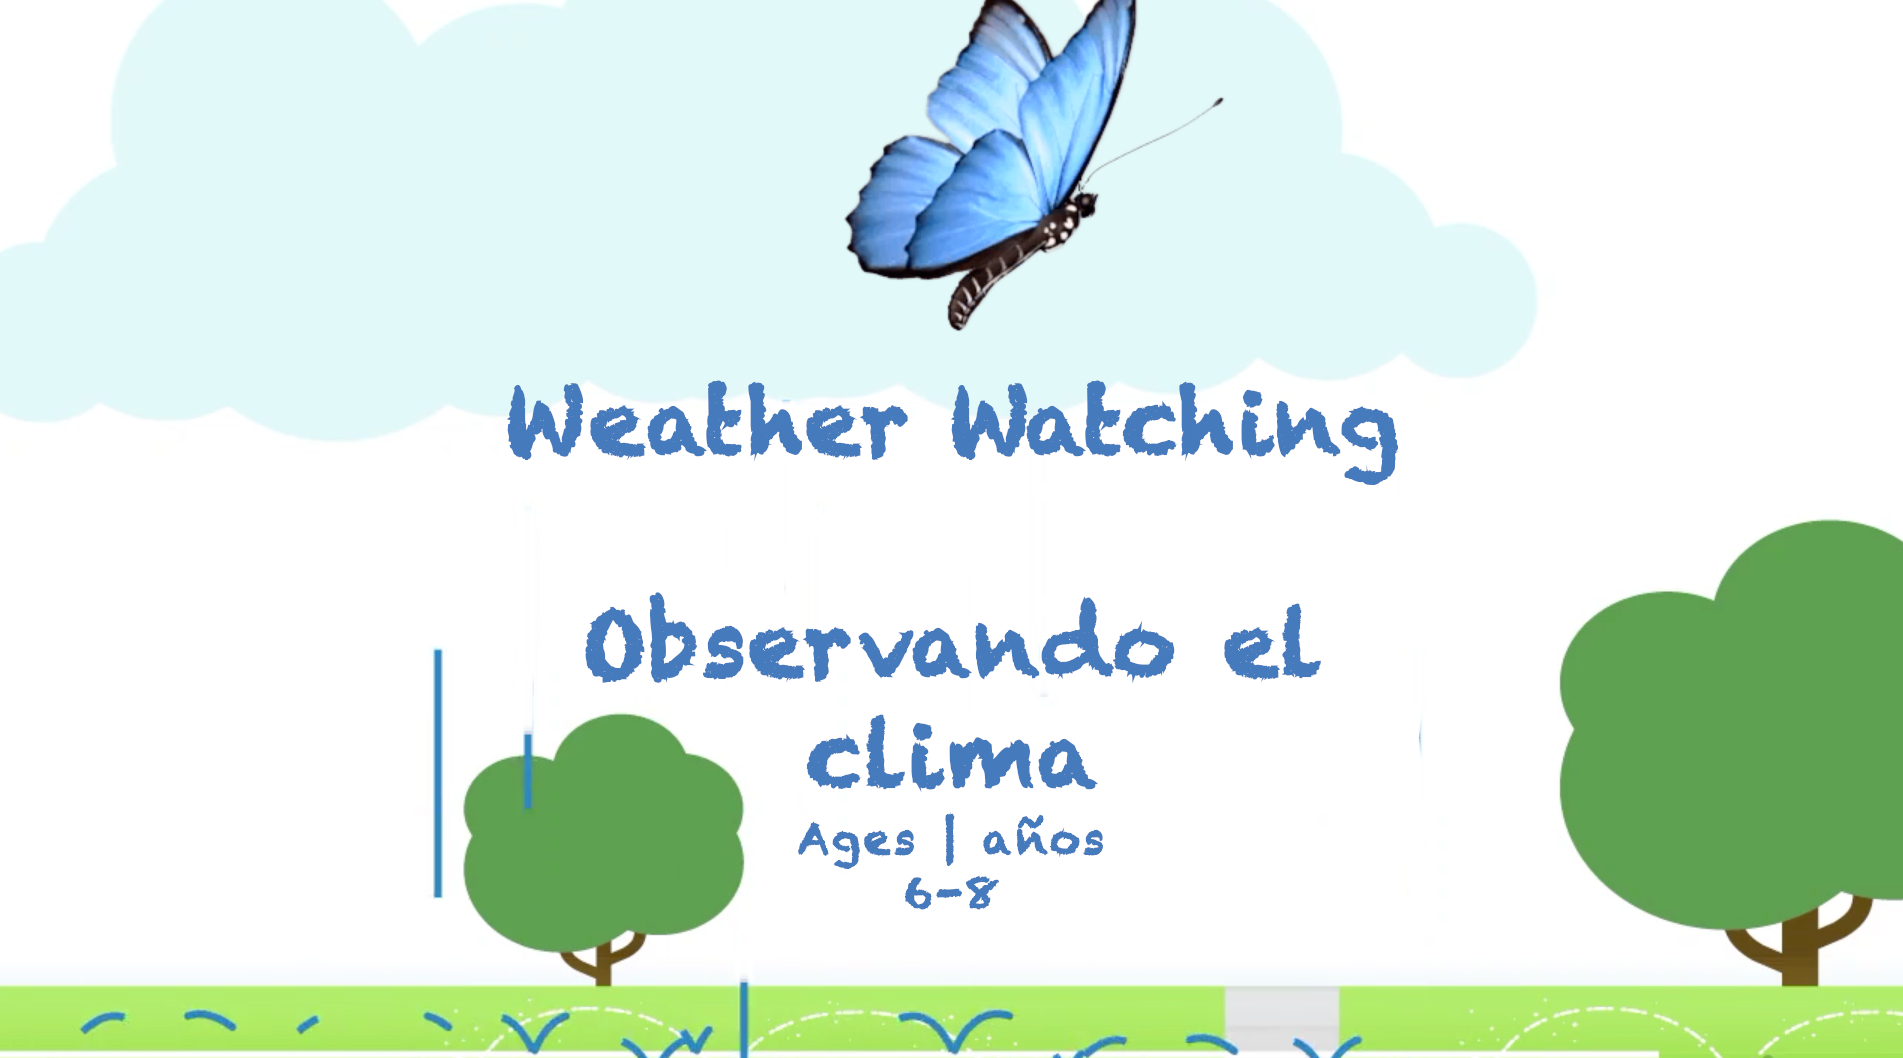 Weather Watching for 6-8 year olds